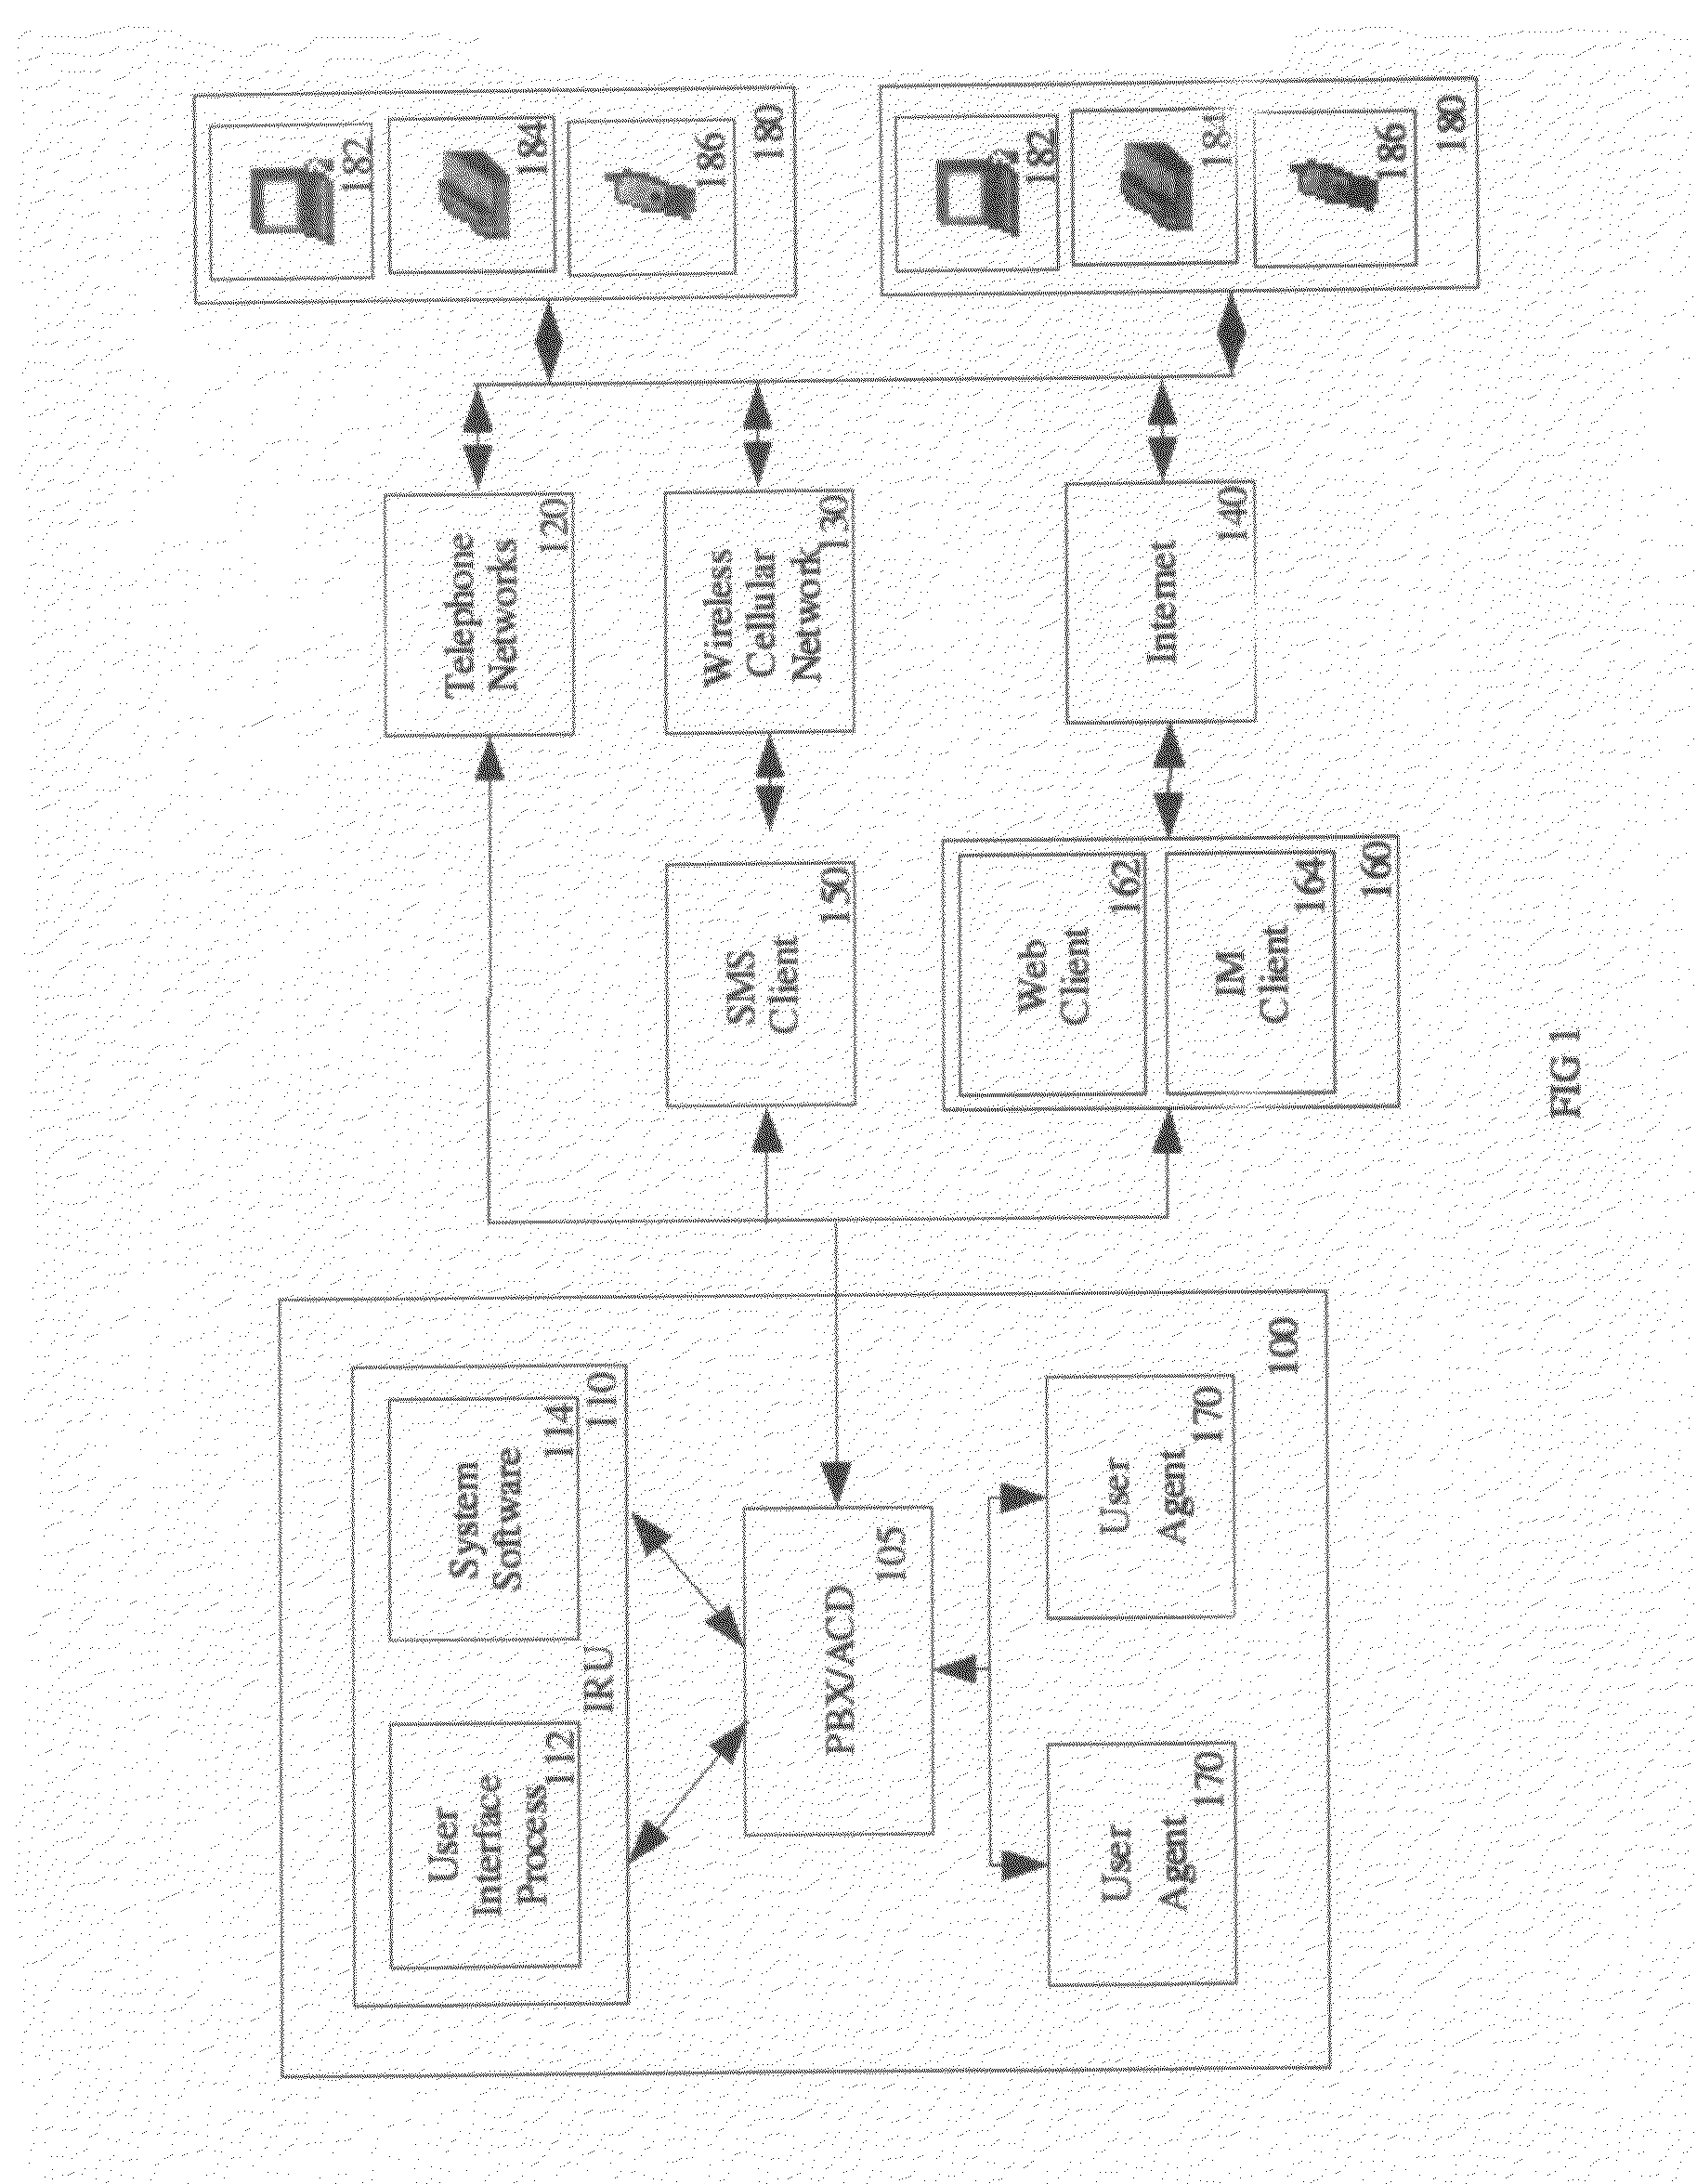 Method and system for entering and managing a caller in a call queue via an untethered form of communication